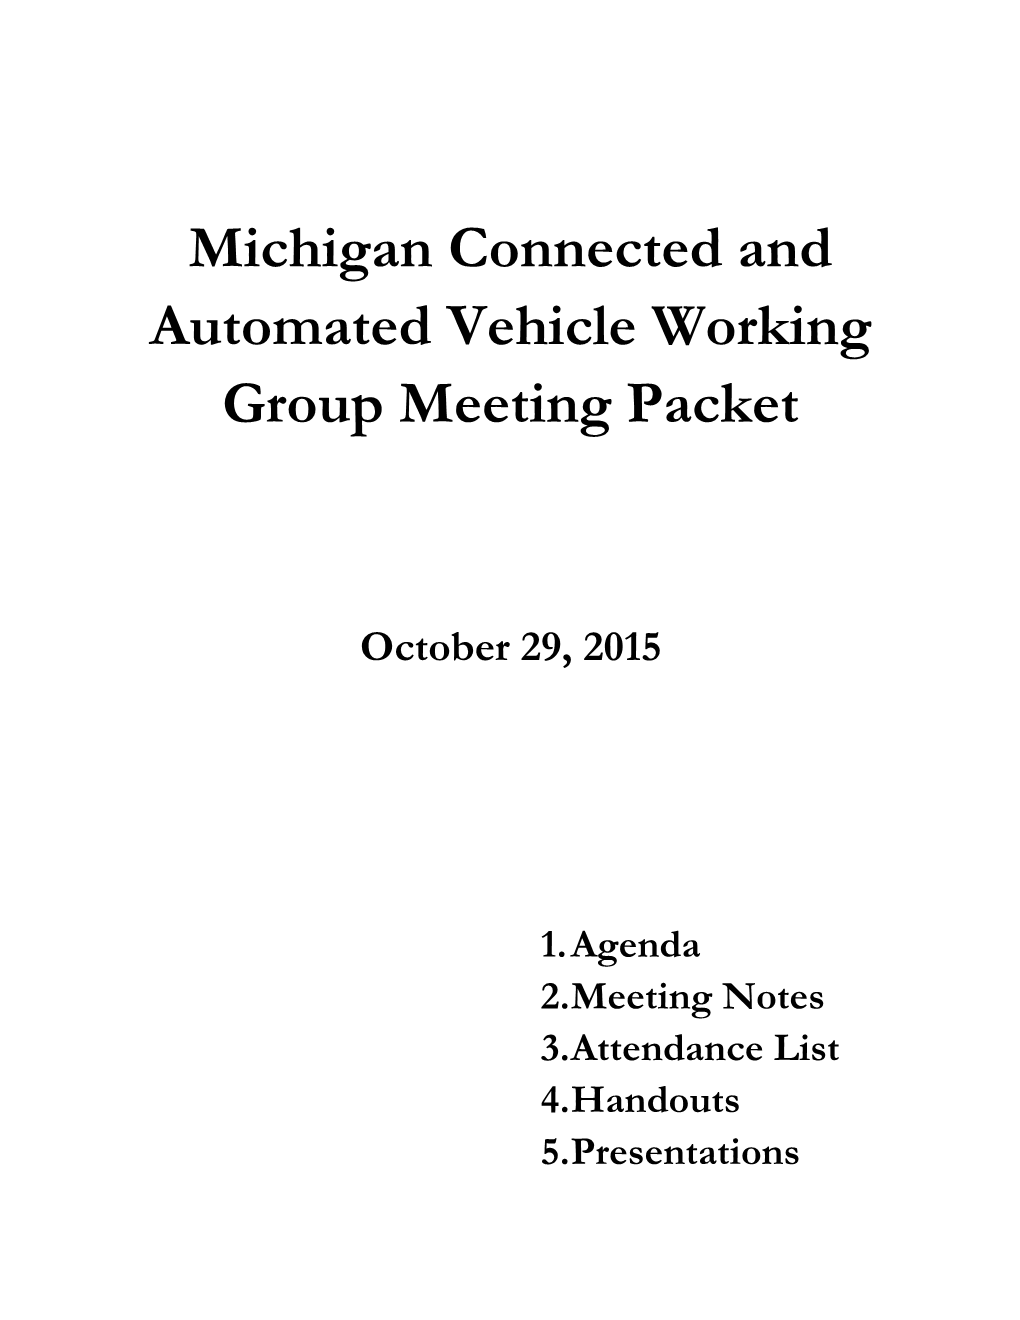 Michigan Connected and Automated Vehicle Working Group Meeting Packet